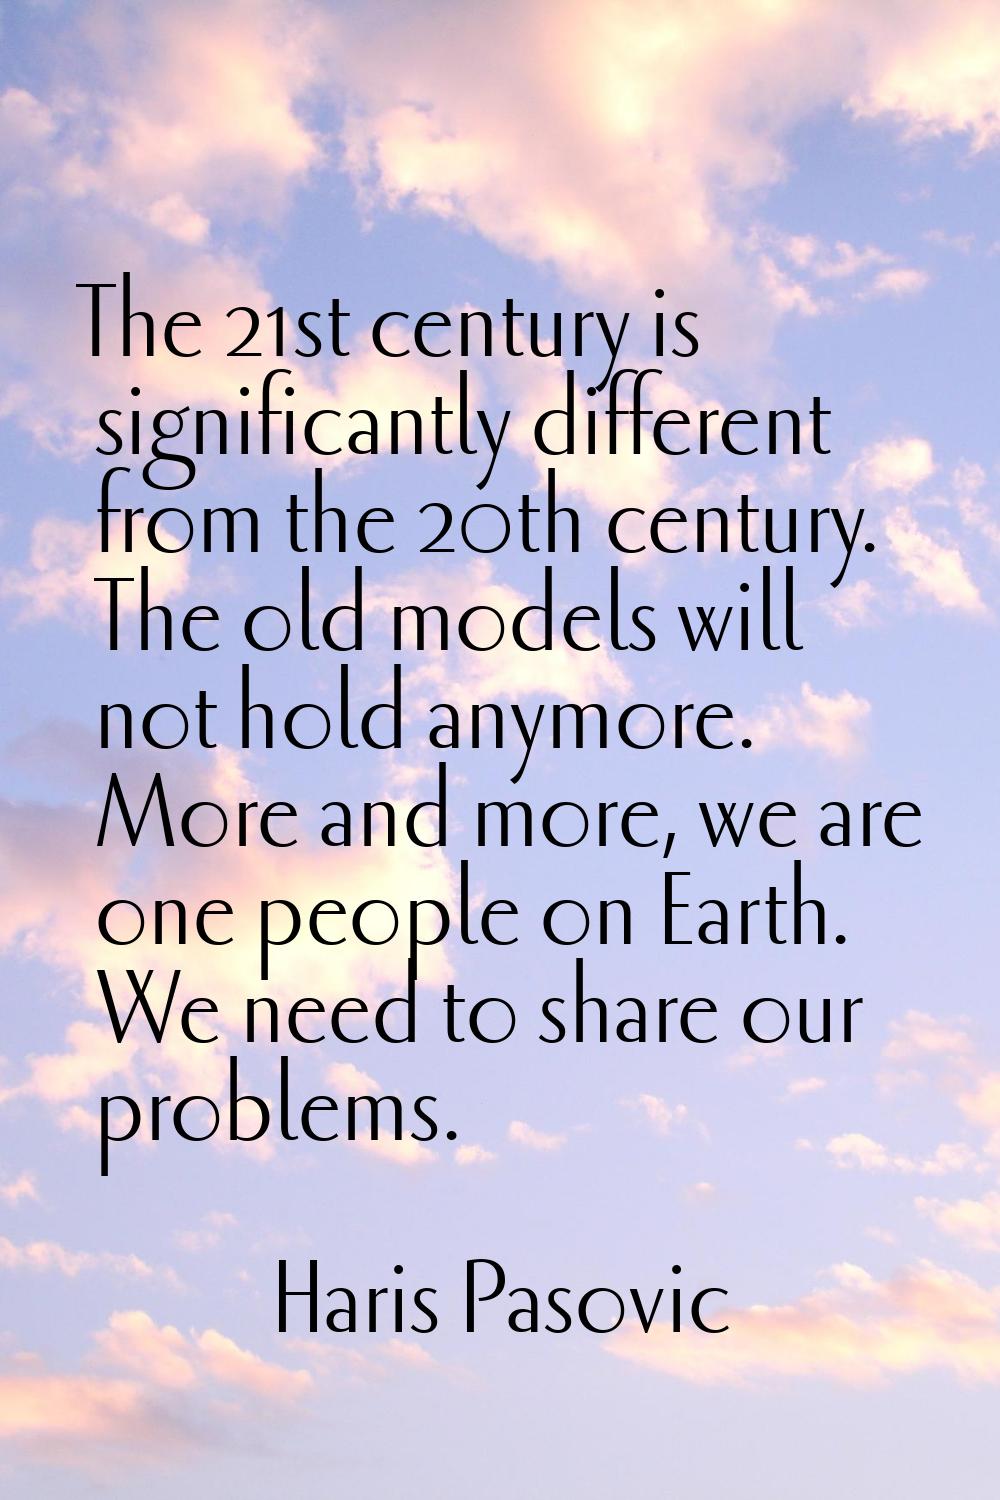 The 21st century is significantly different from the 20th century. The old models will not hold any